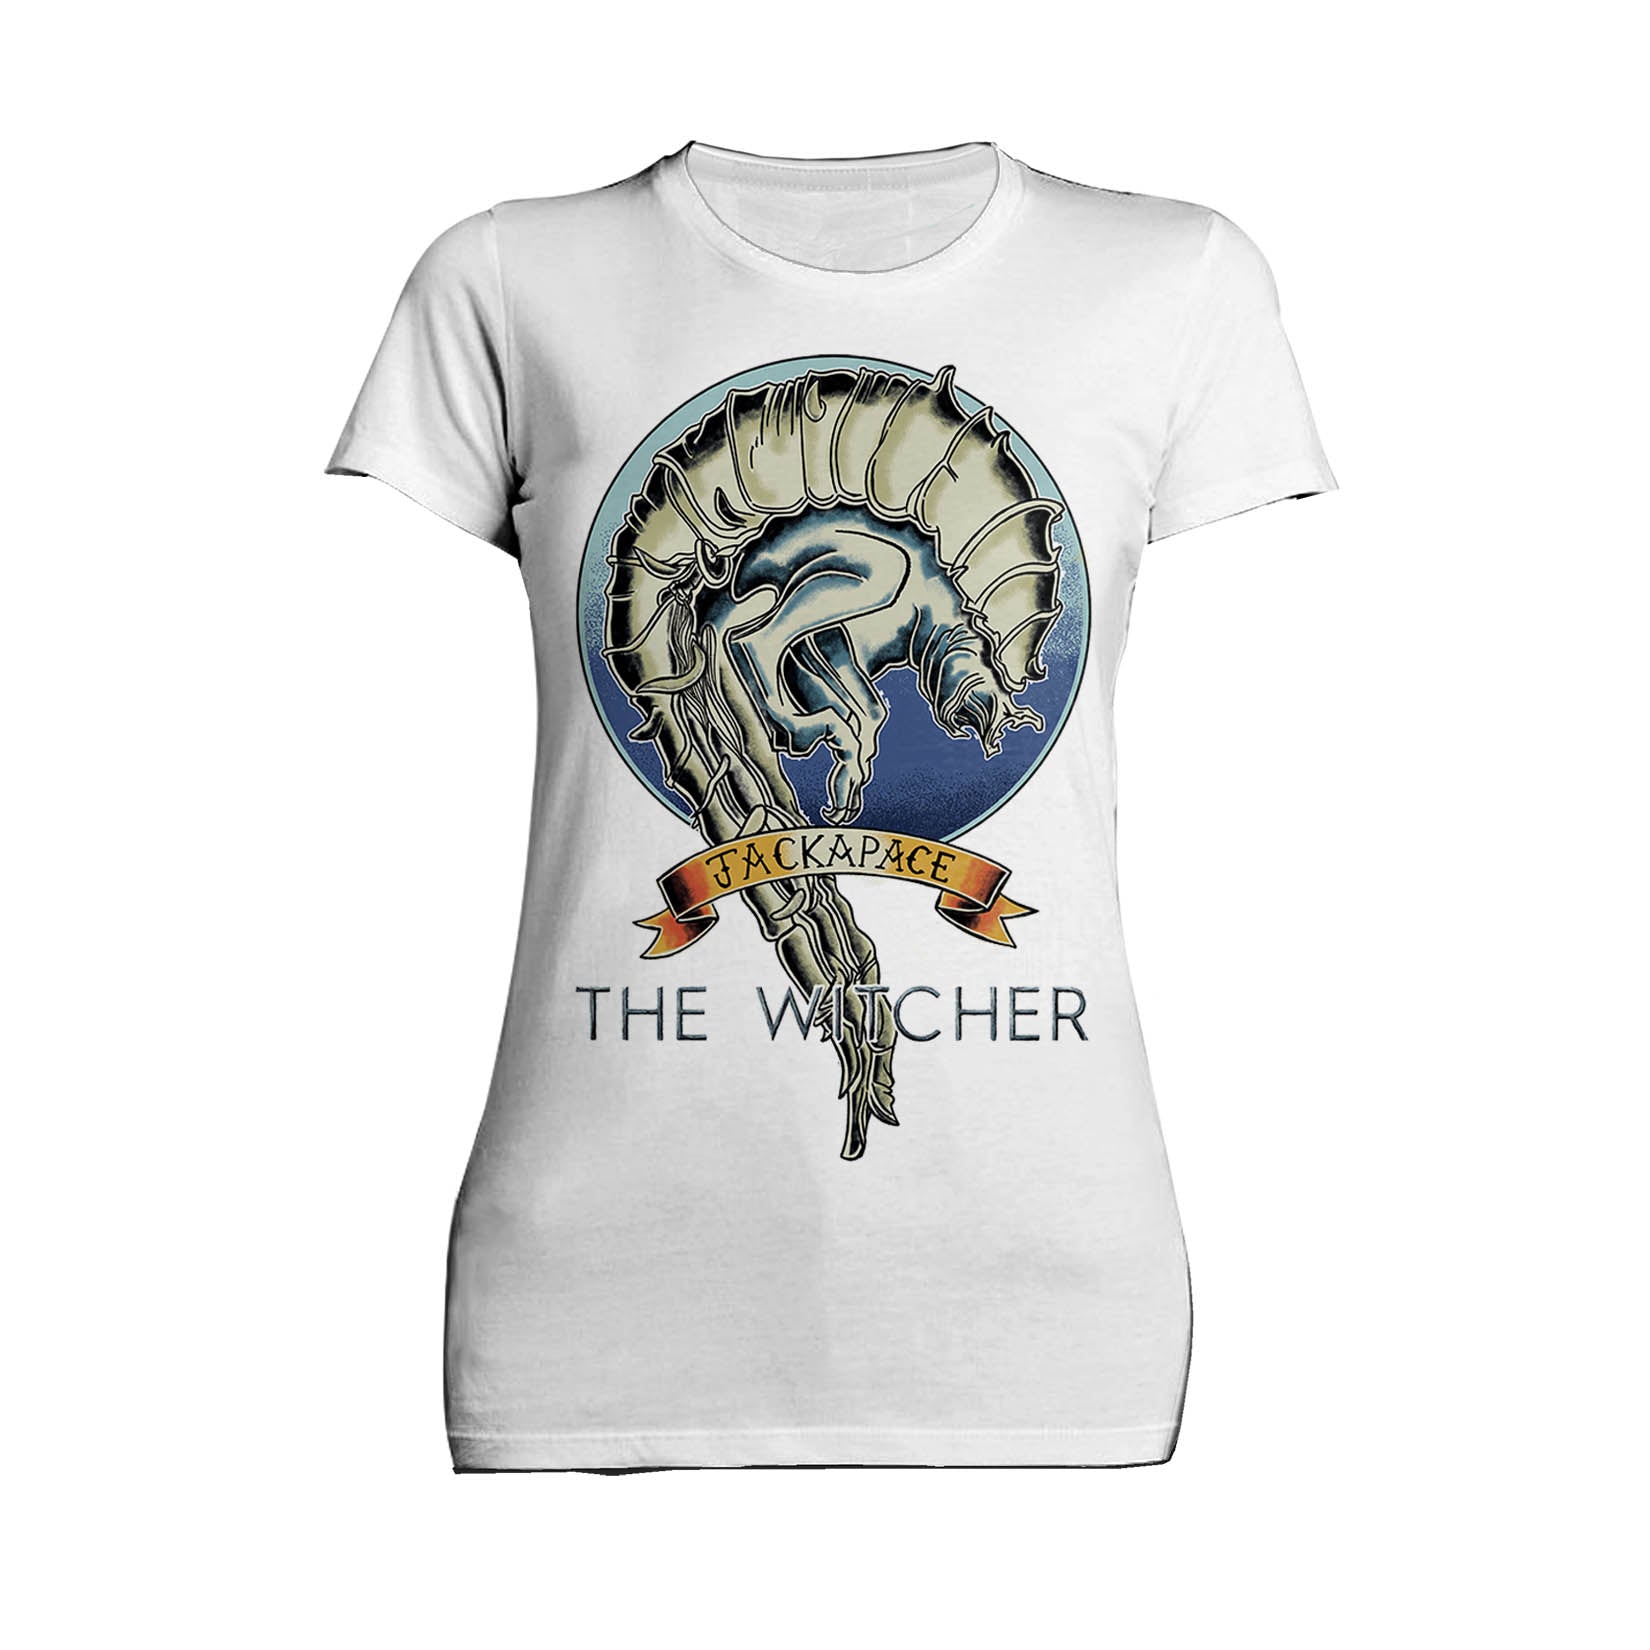 The Witcher Book of Beasts Jackapace Official Women's T-Shirt